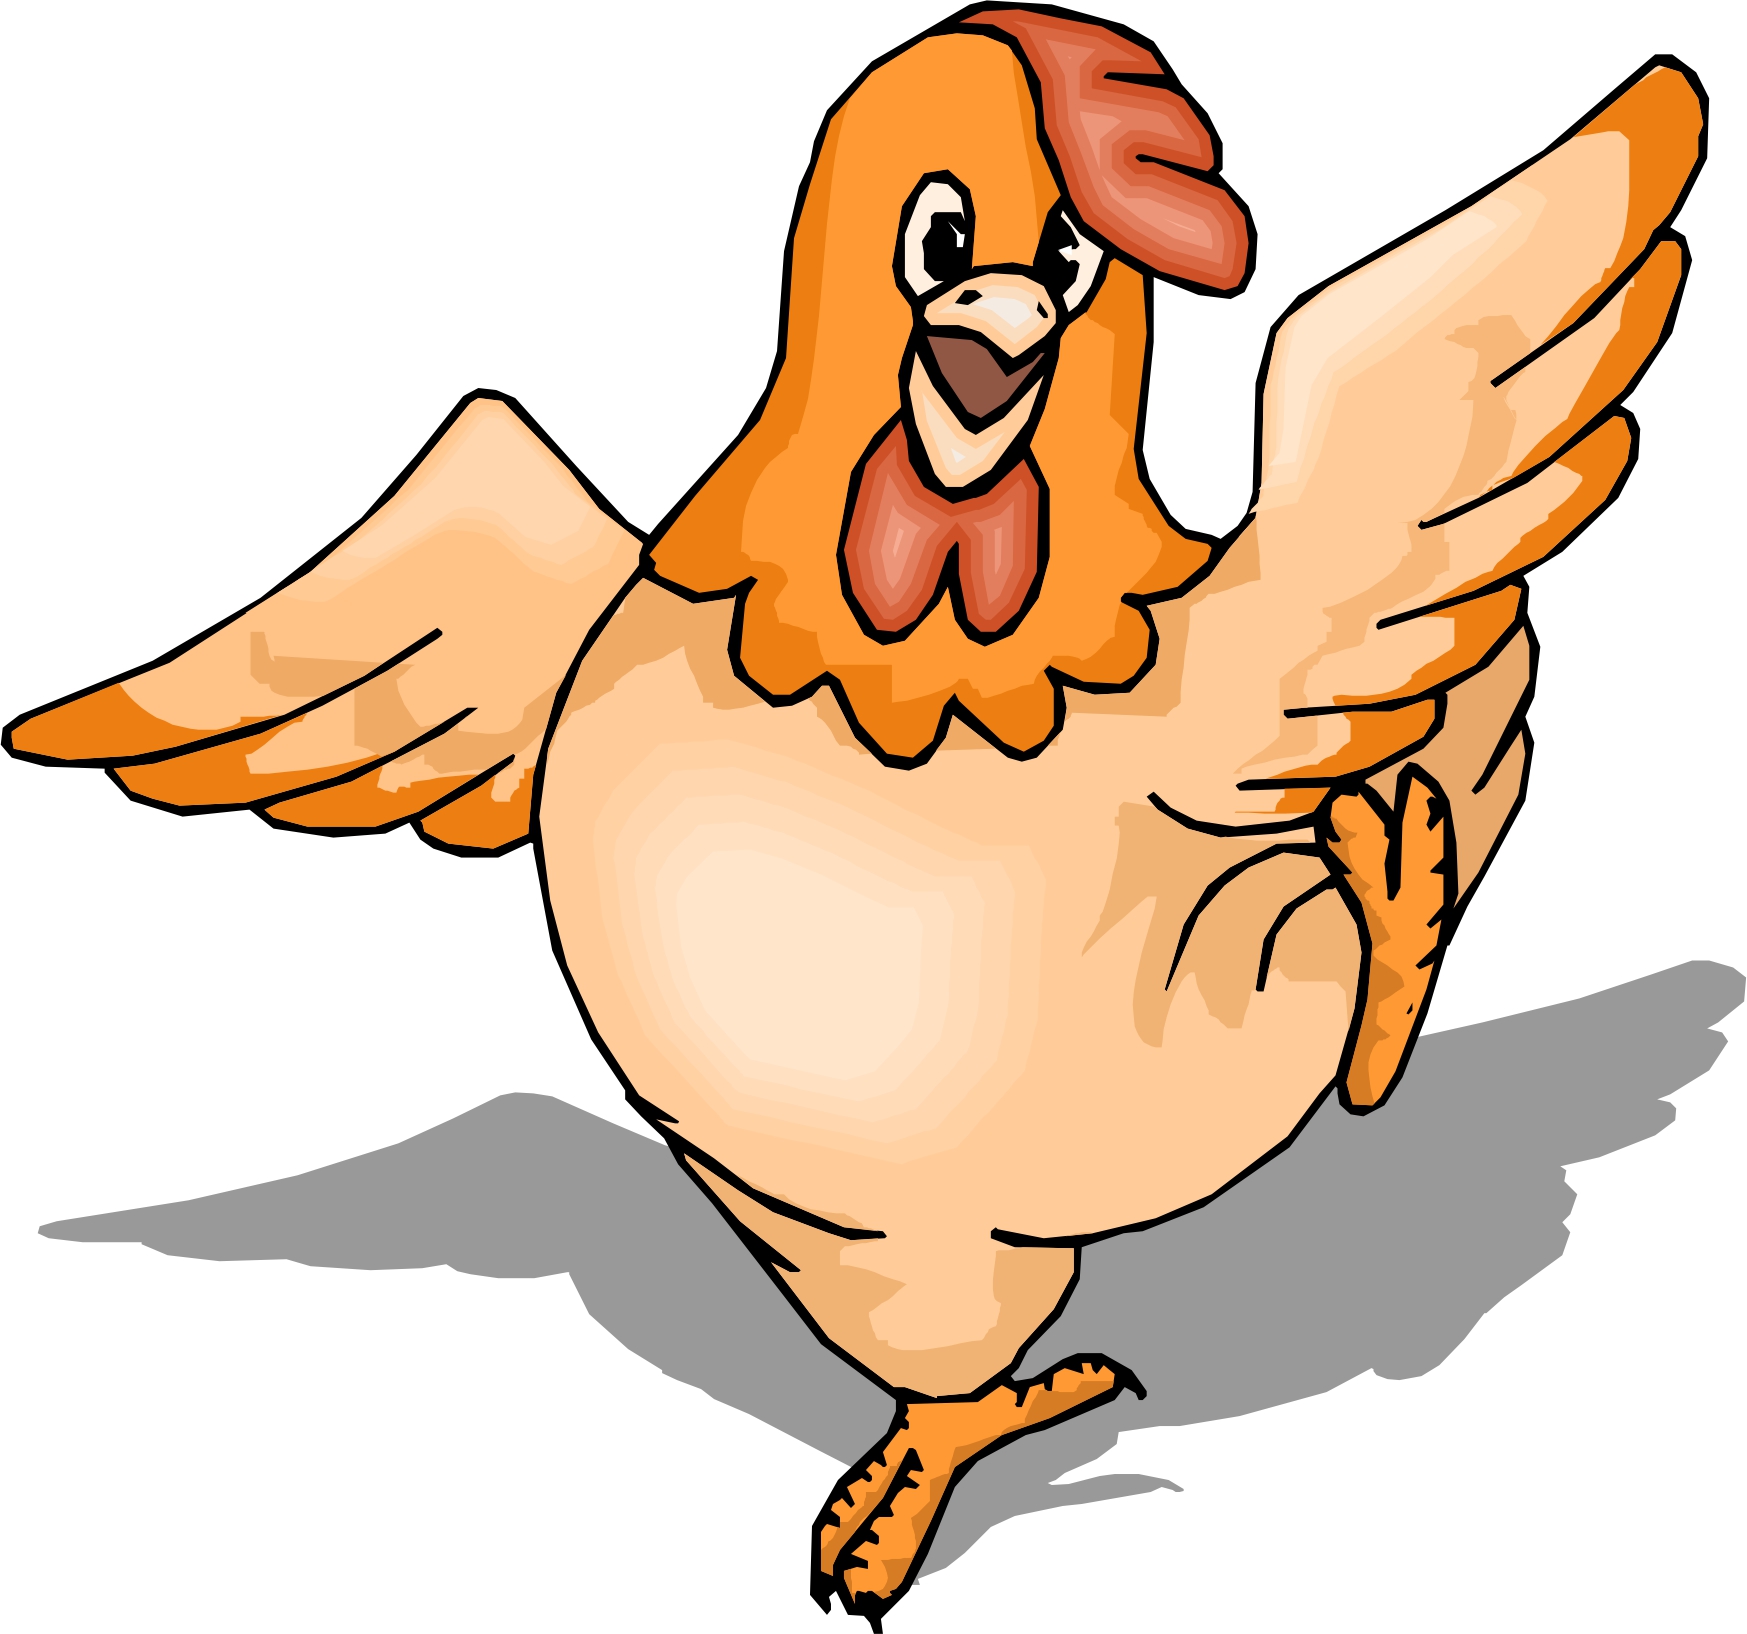 1000+ images about Cartoon Chickens